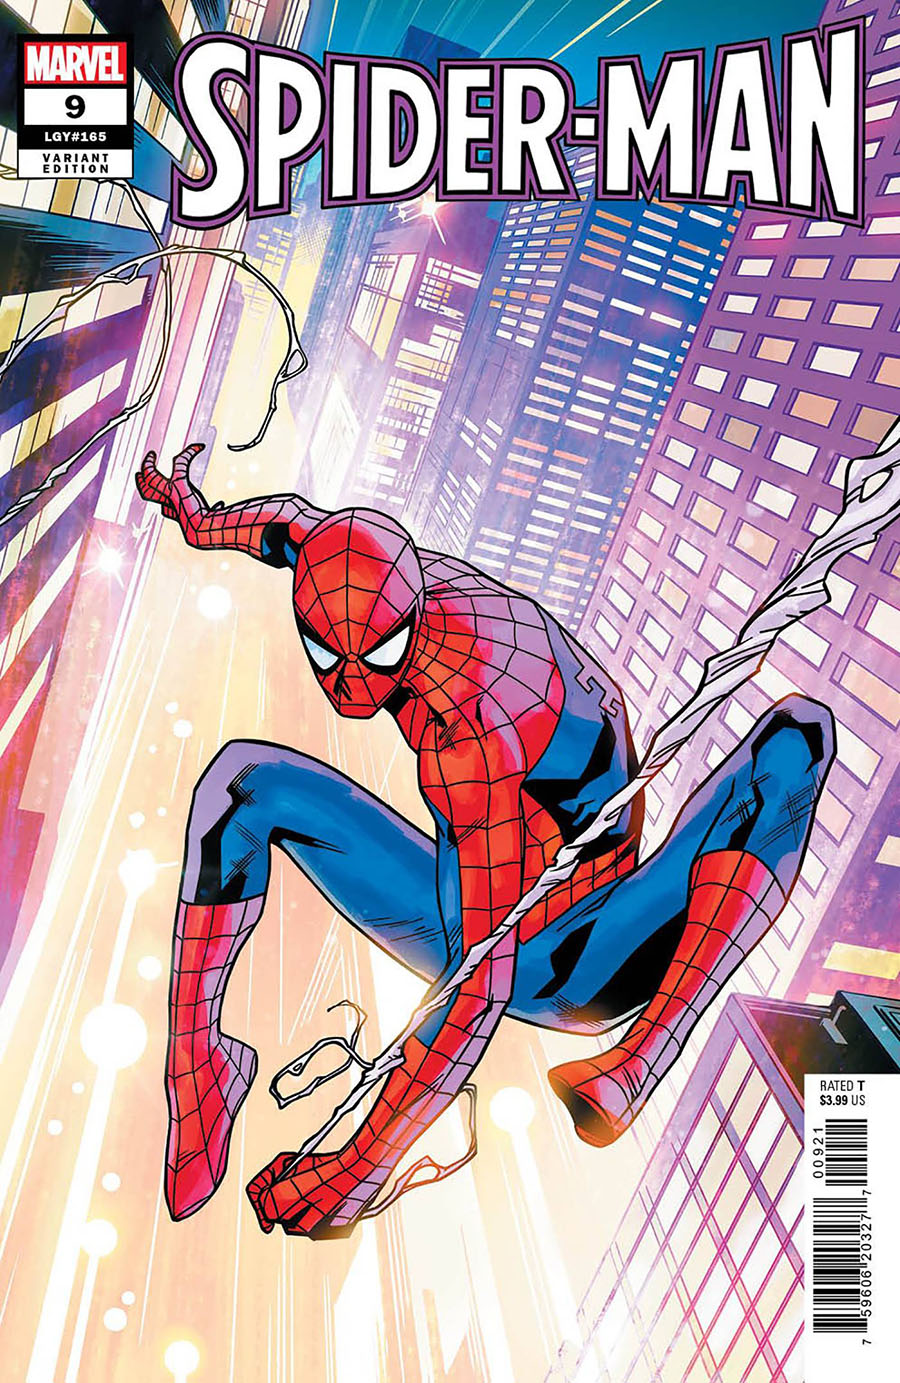 Spider-Man Vol 4 #9 Cover B Variant Andres Genolet Cover